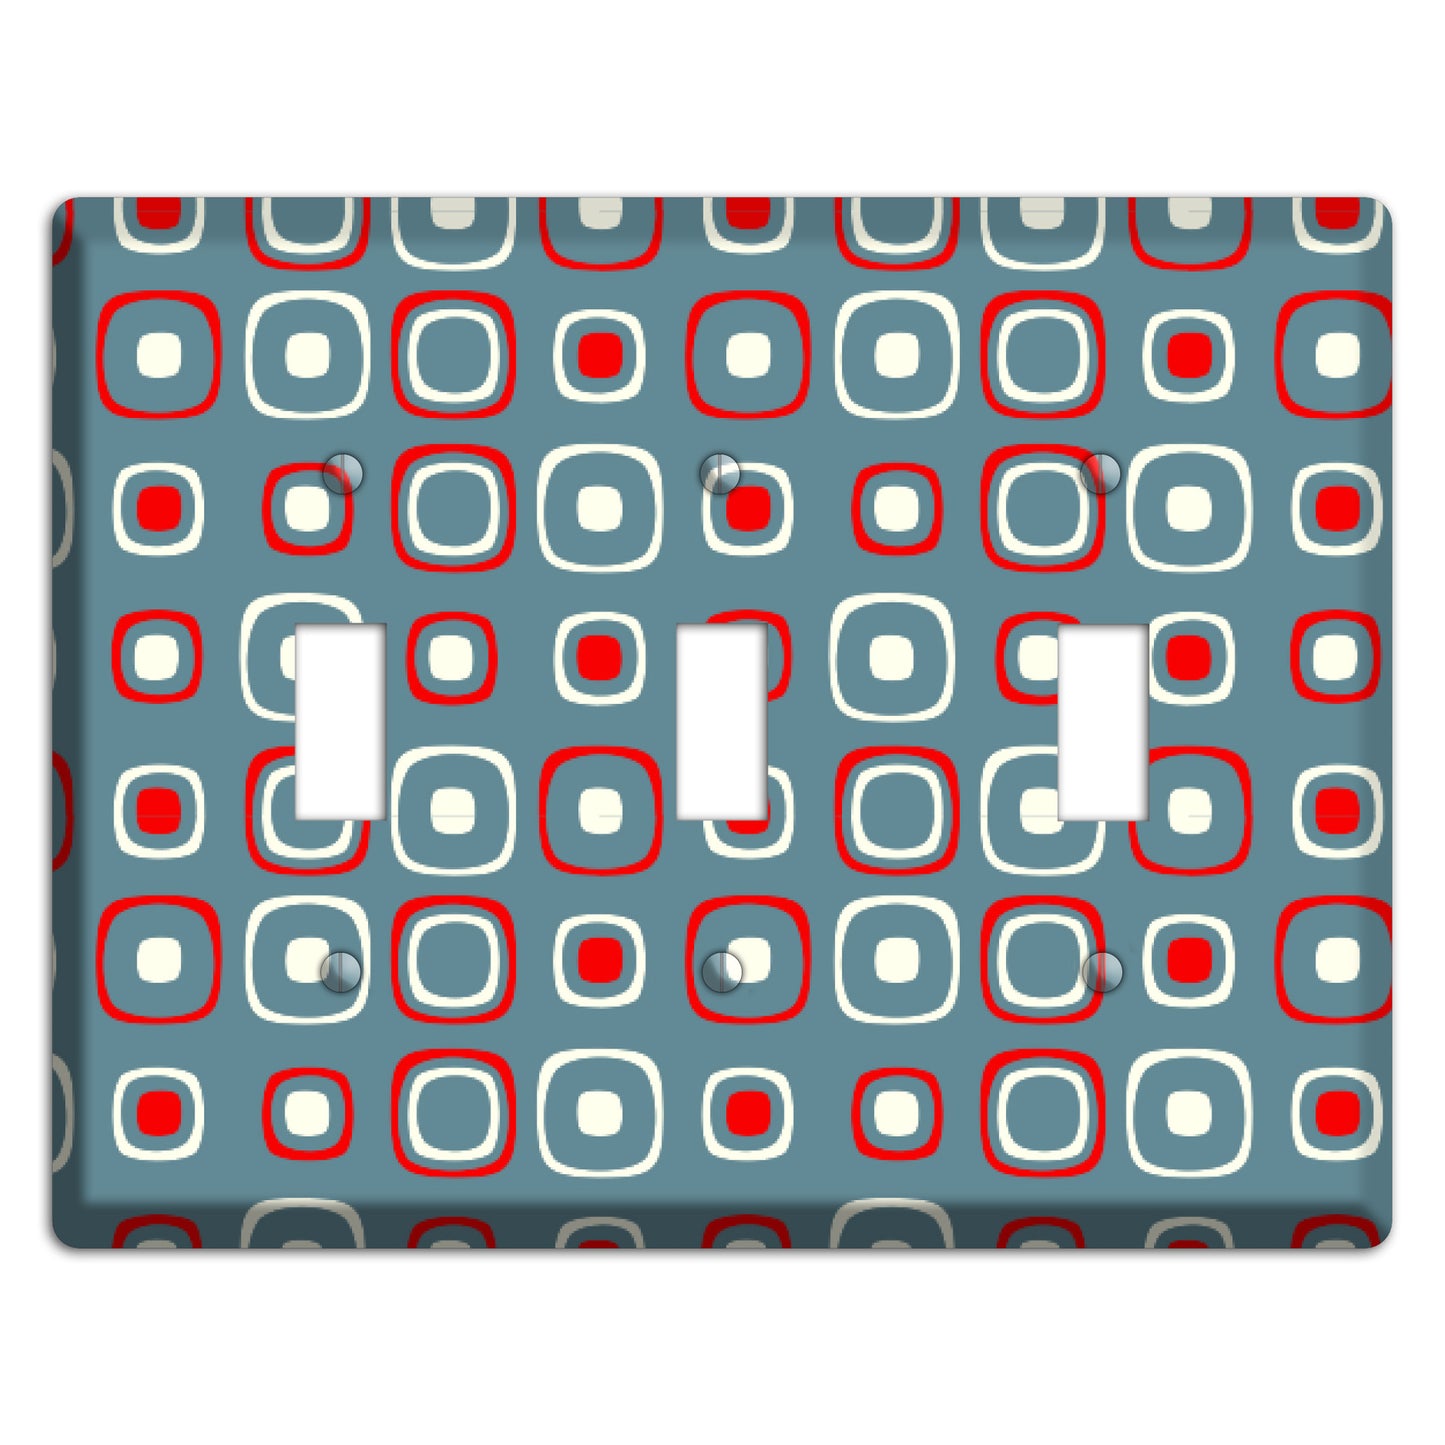 Blue and Red Rounded Squares 3 Toggle Wallplate